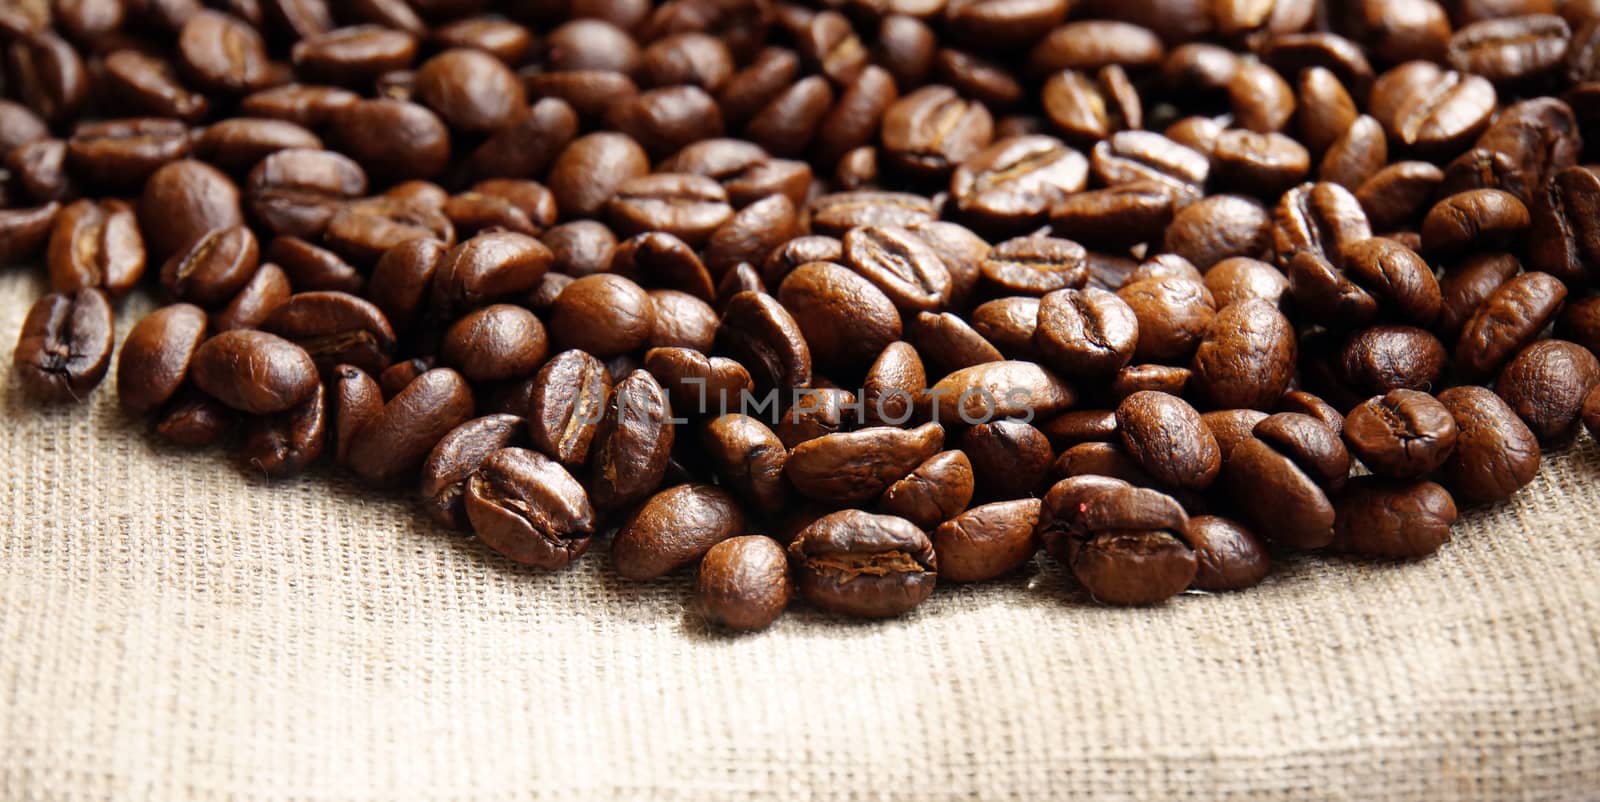 Background from coffee beans on fabric closeup                               